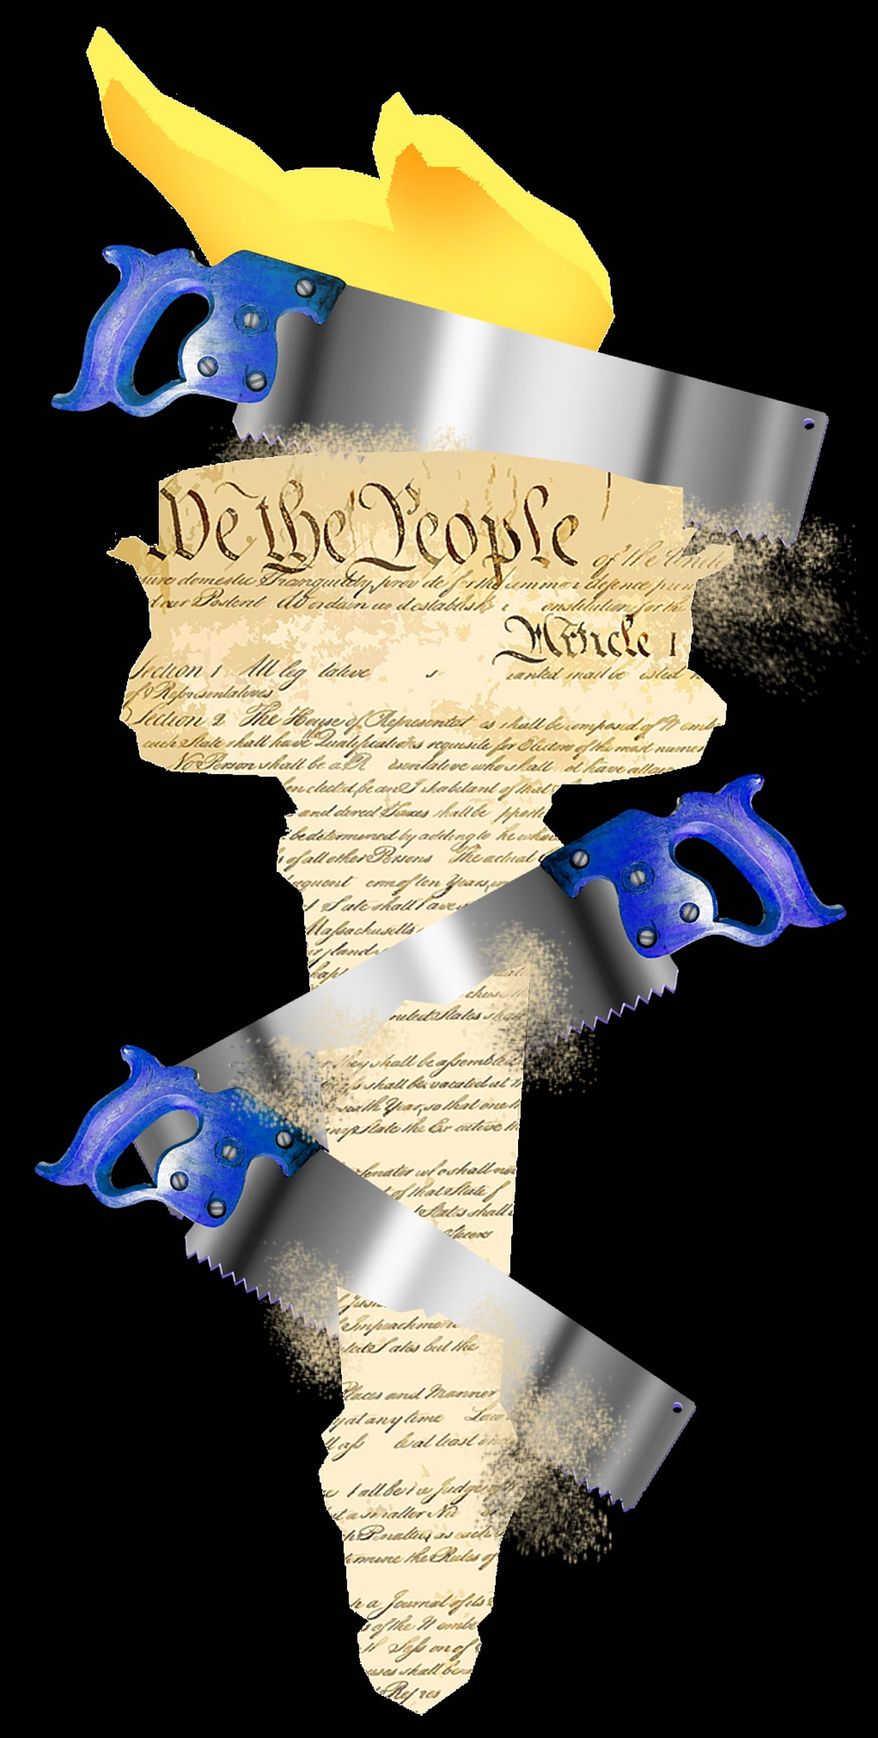 Illustration on proposals that threaten liberty and Constitution by Alexander Hunter/The Washington Times